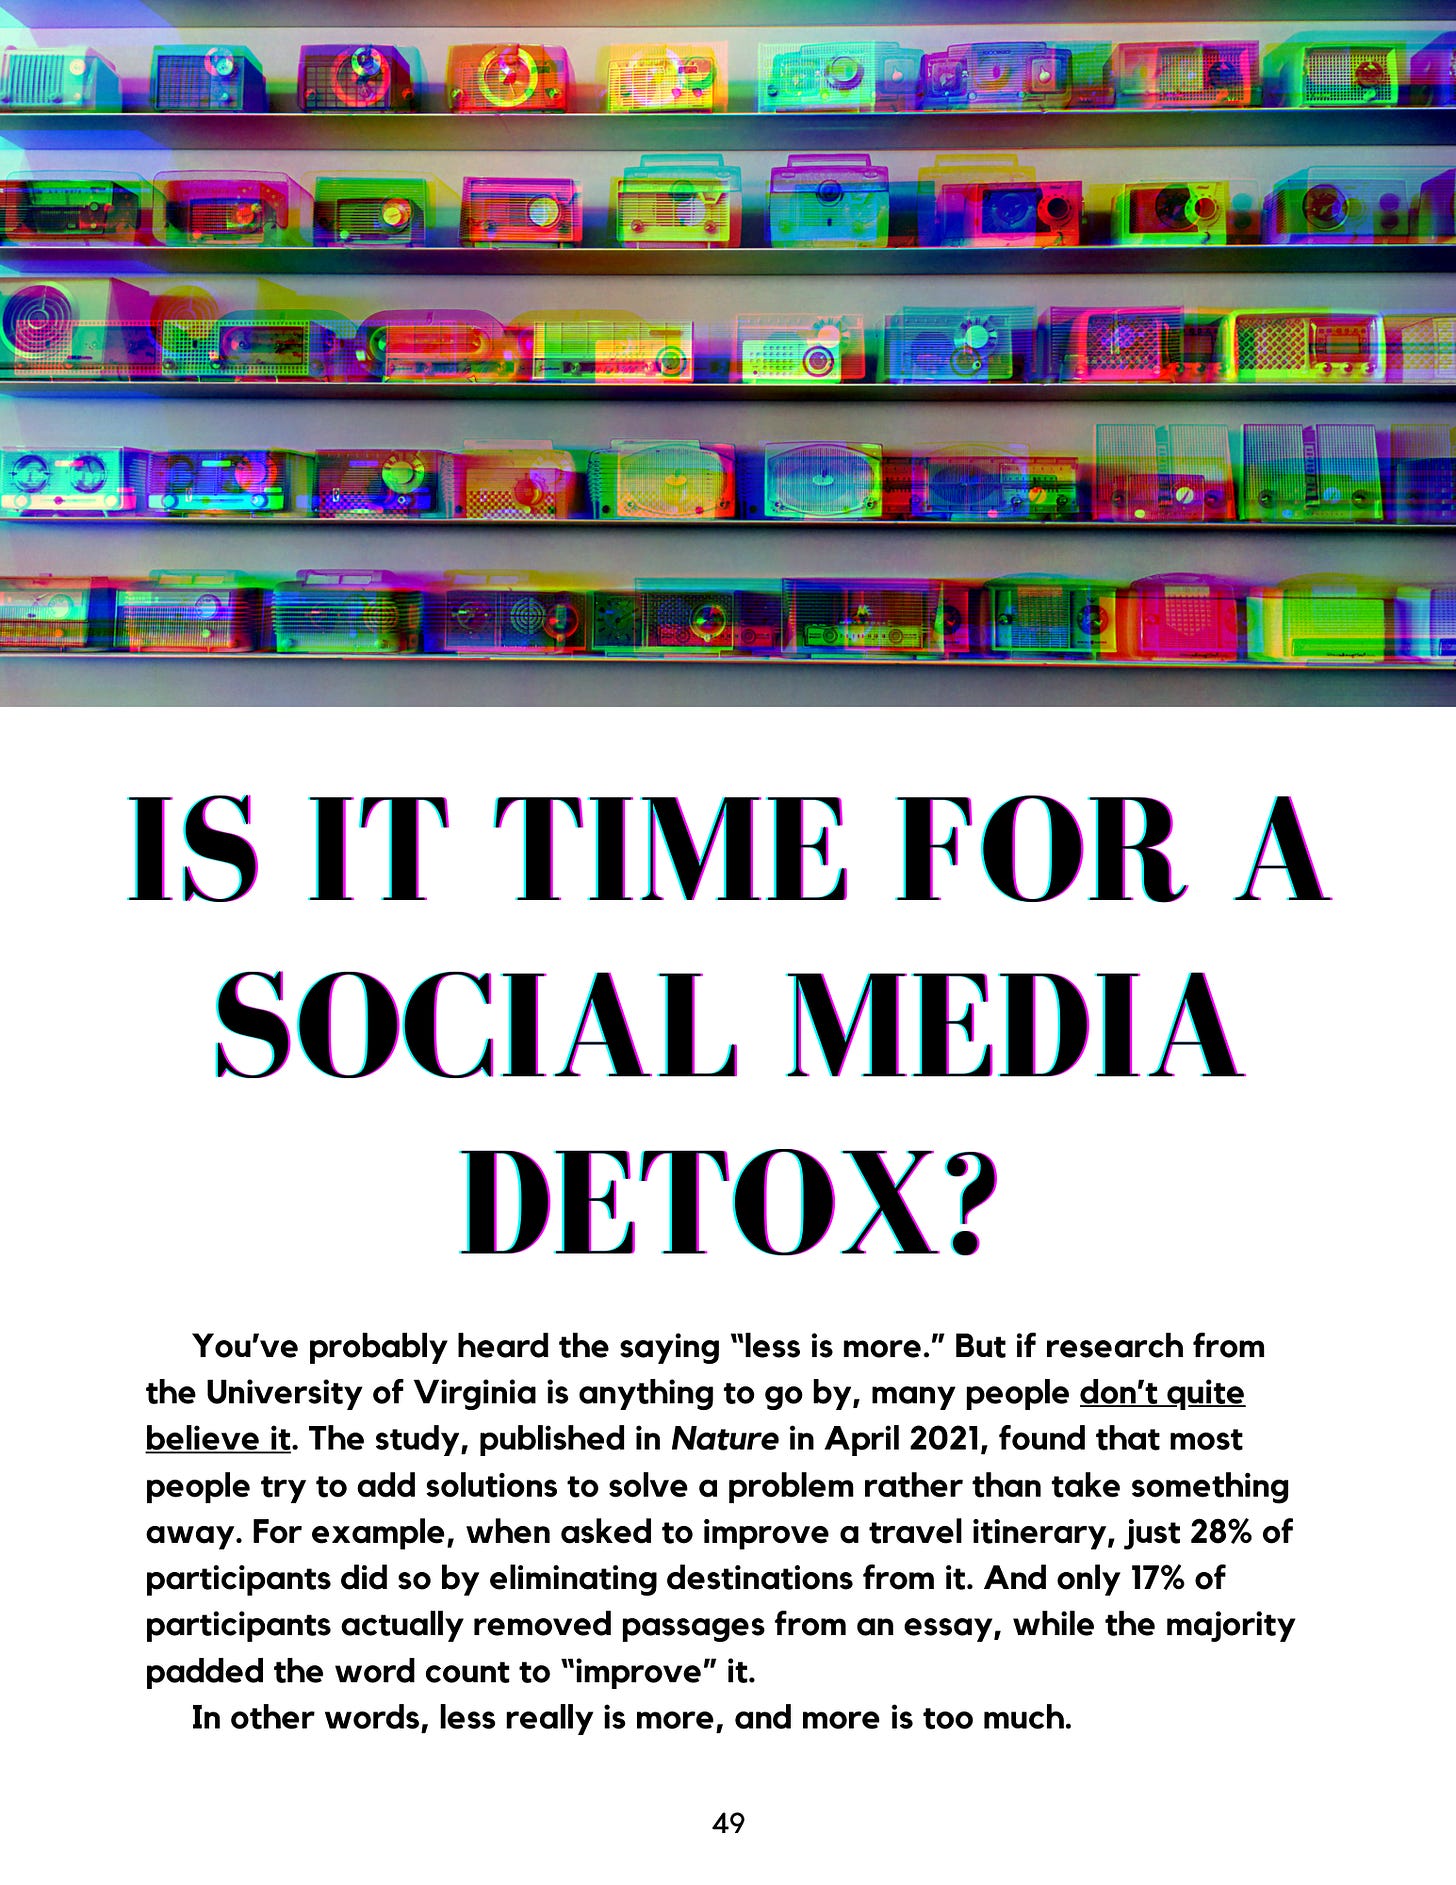 Article header: Is it Time for a Social Media Detox?